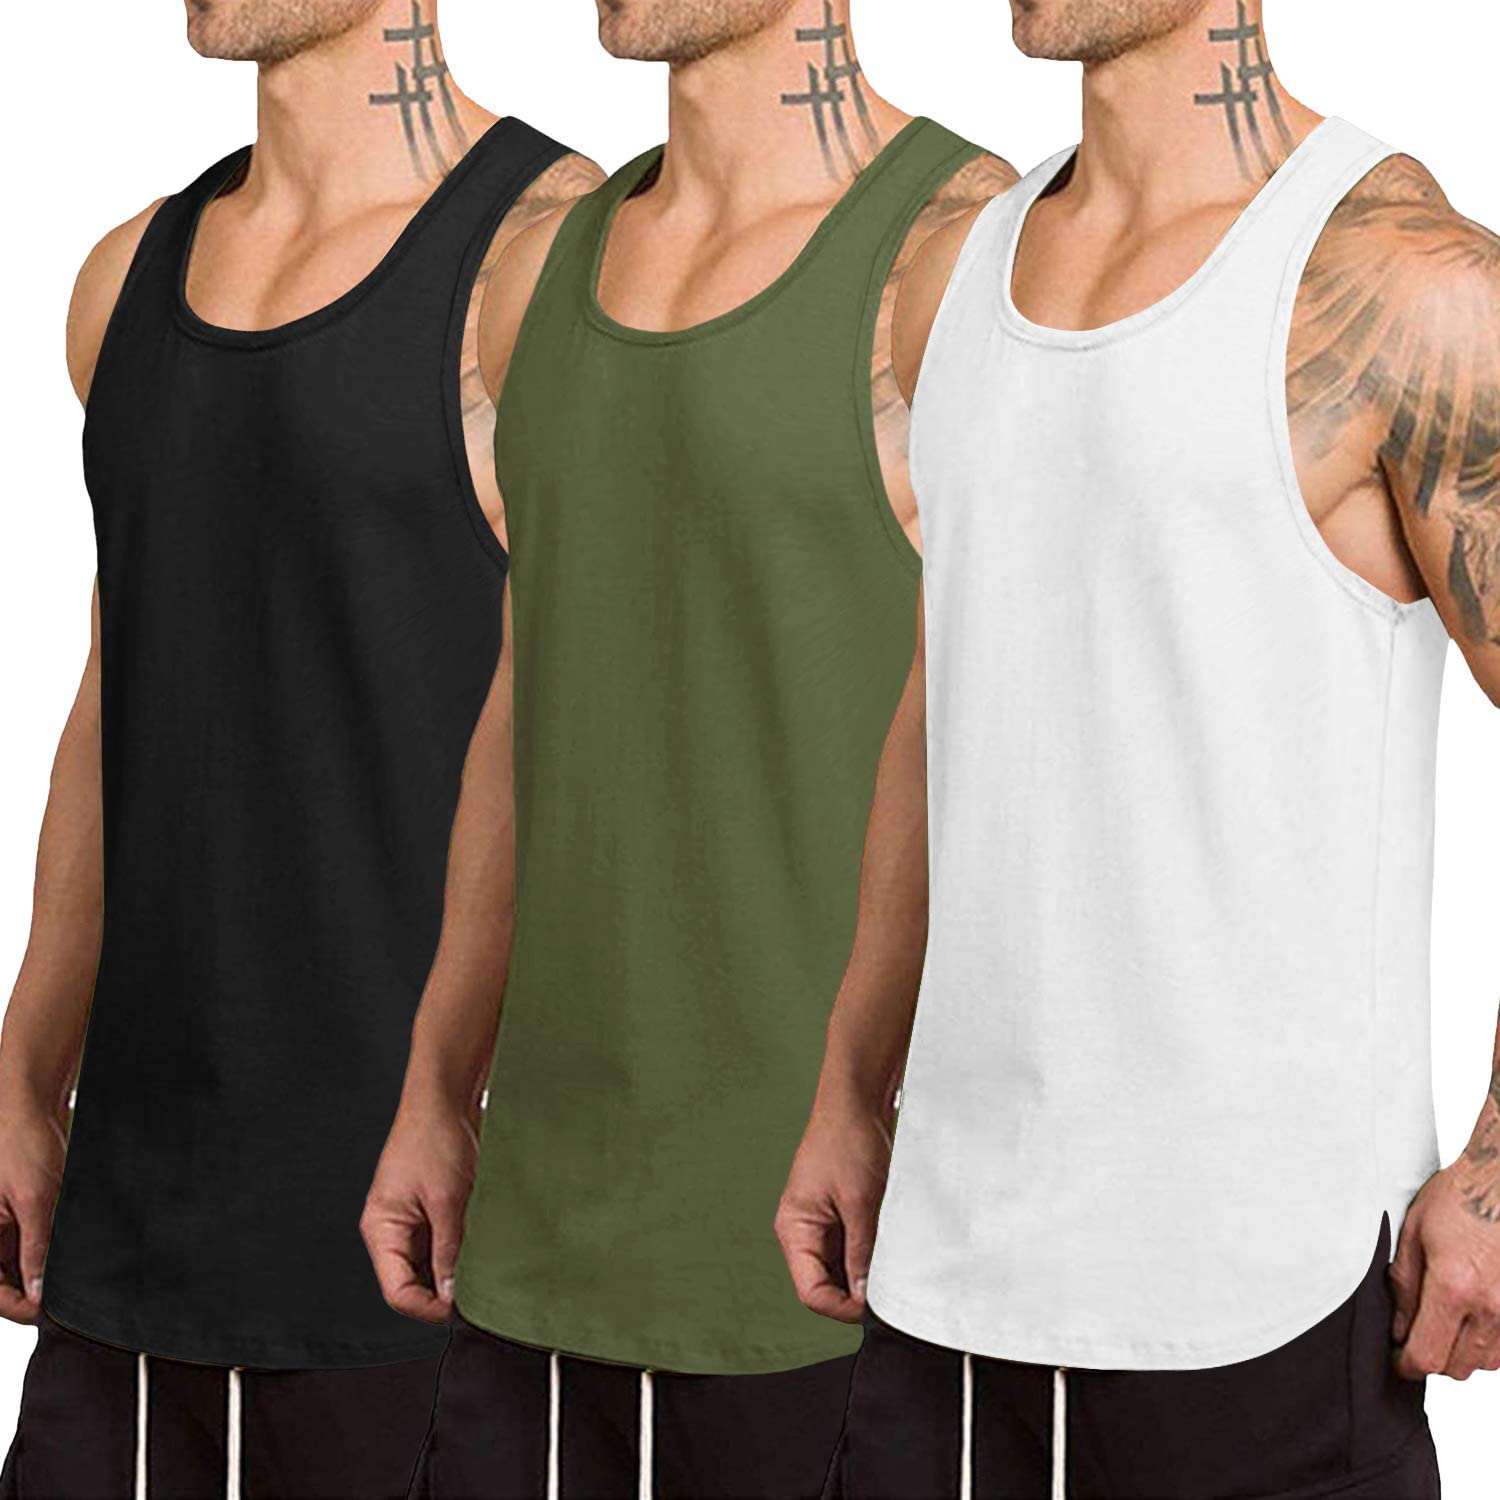  COOFANDY Men's 3 Pack Workout Tank Top Quick Dry Gym Muscle Tee  Training Bodybuilding Fitness Sleeveless Shirts : Clothing, Shoes & Jewelry